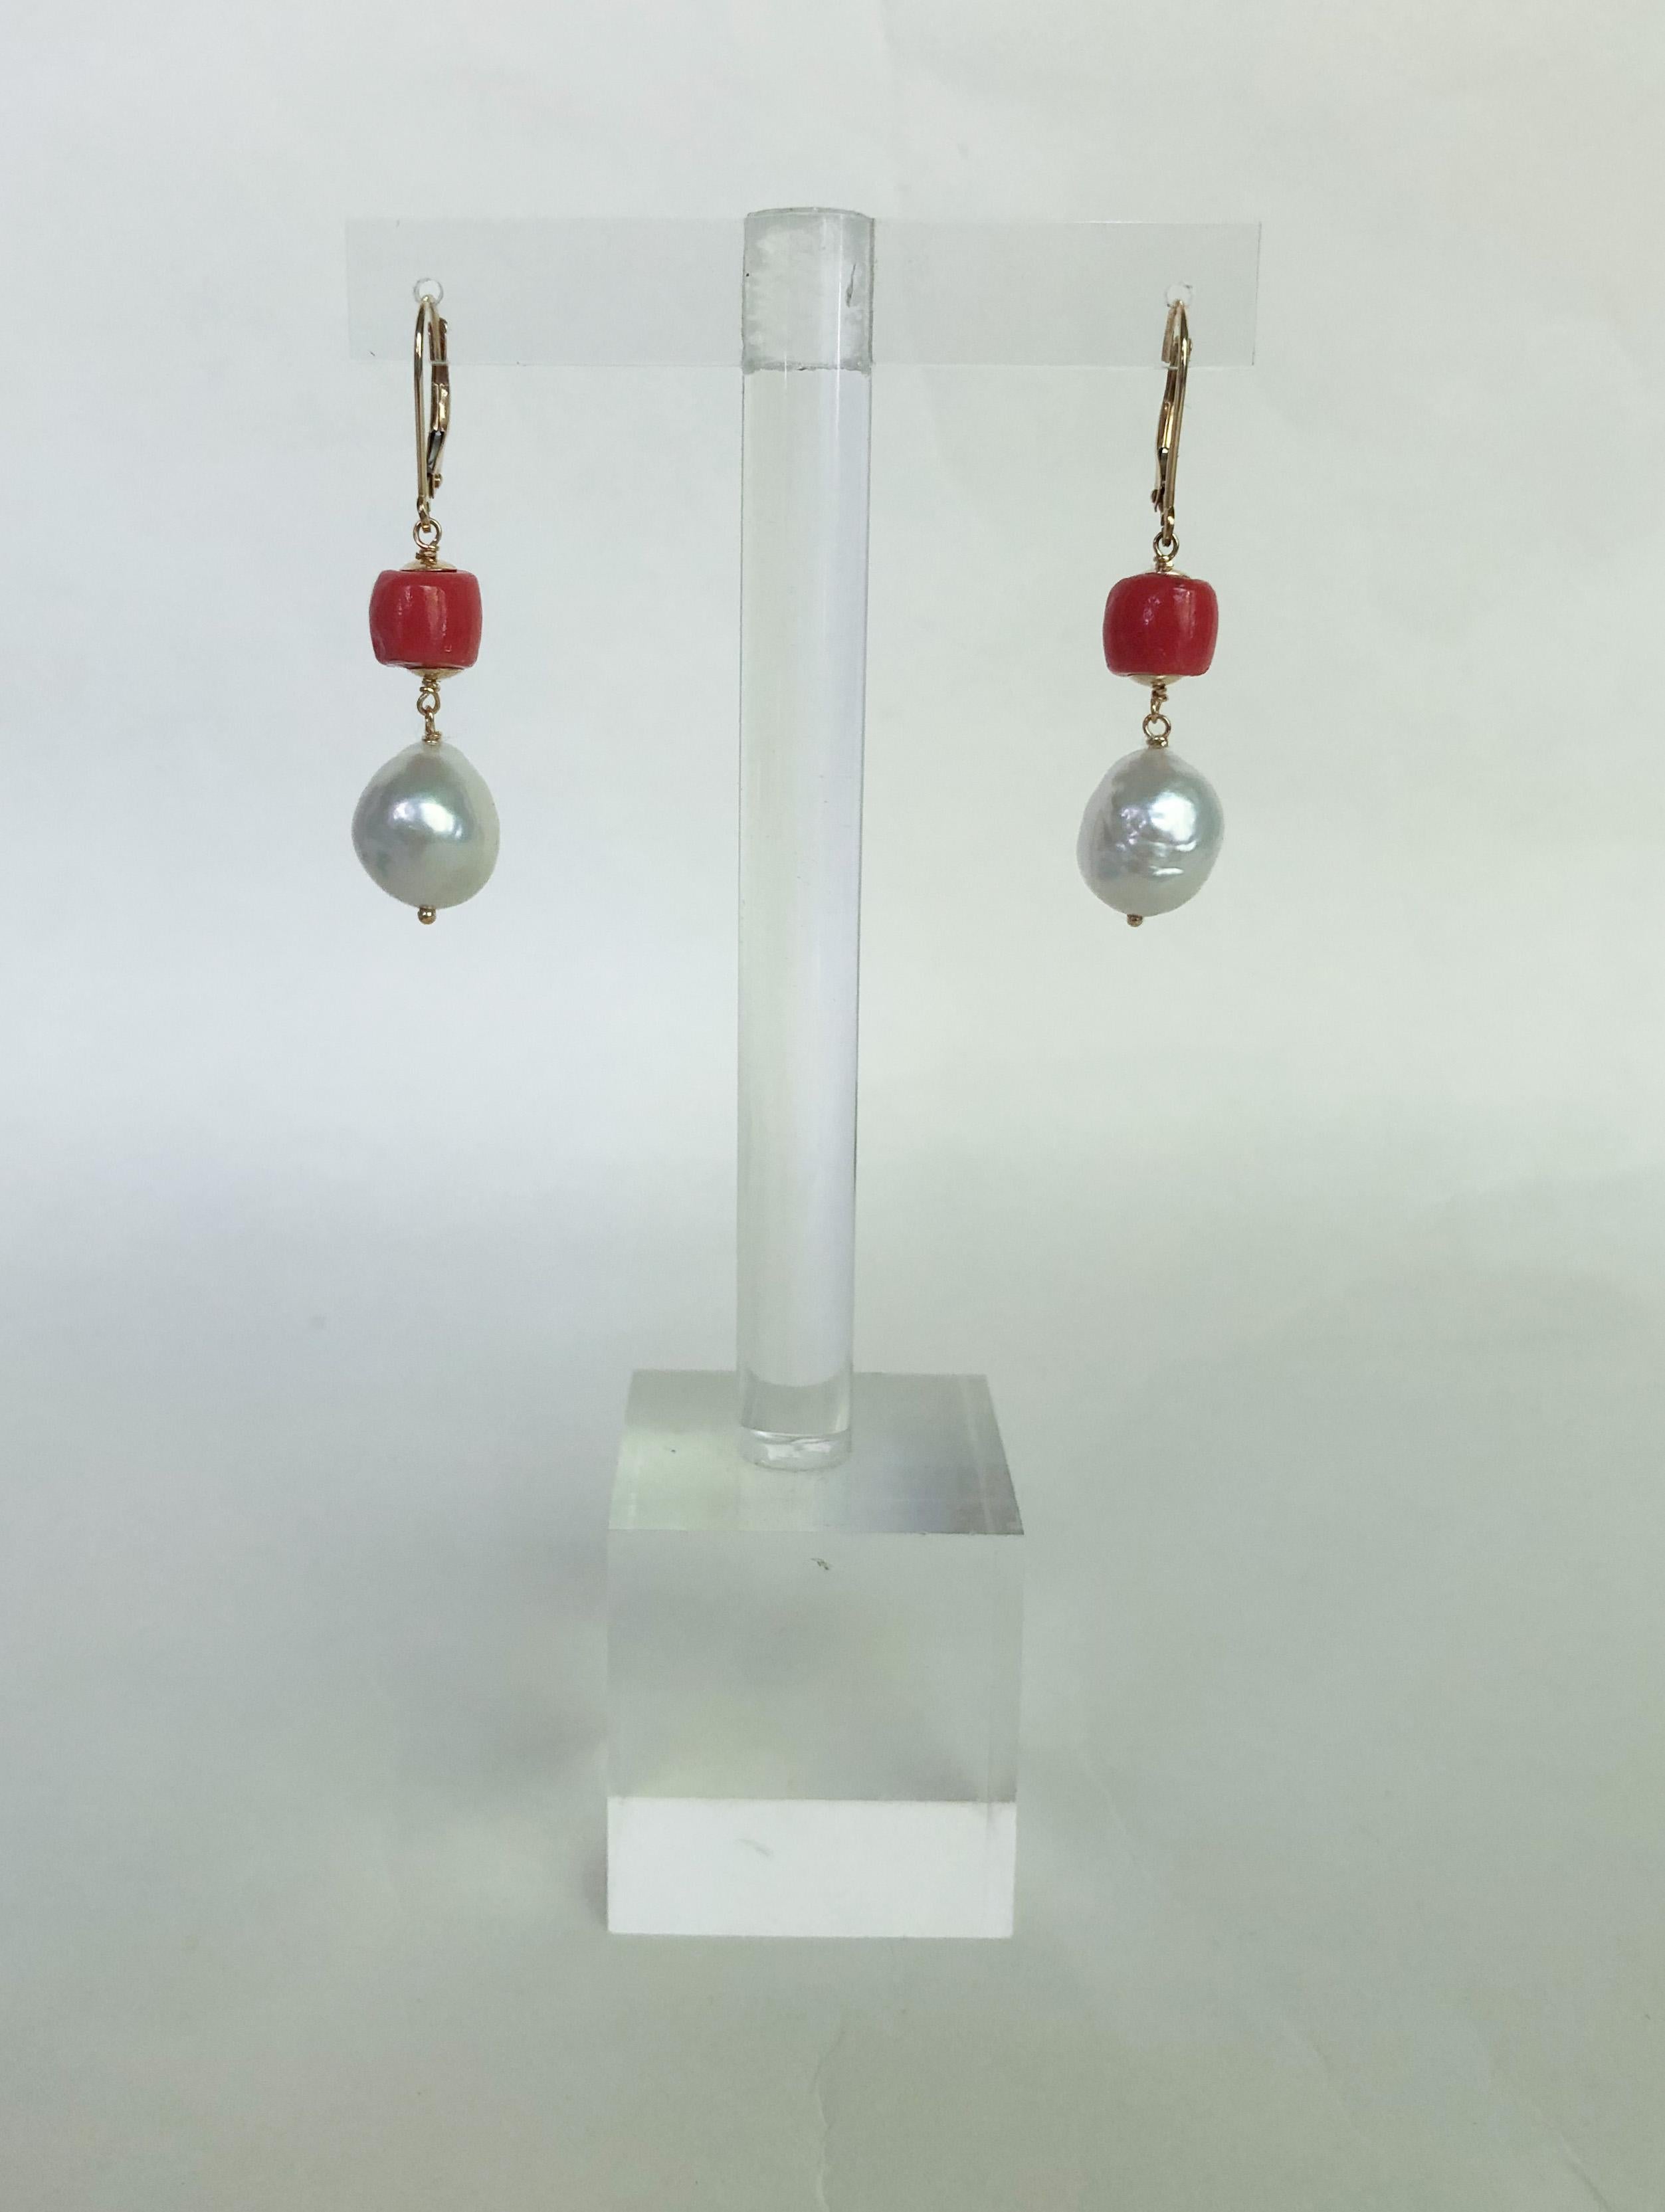 These elegant and dainty coral and white pearl earrings are highlighted with 14k yellow gold lever backs and wiring. They are the classic pearl earrings with vibrant coral to add a touch of color and vibrancy. They are 1 inch long, and embody